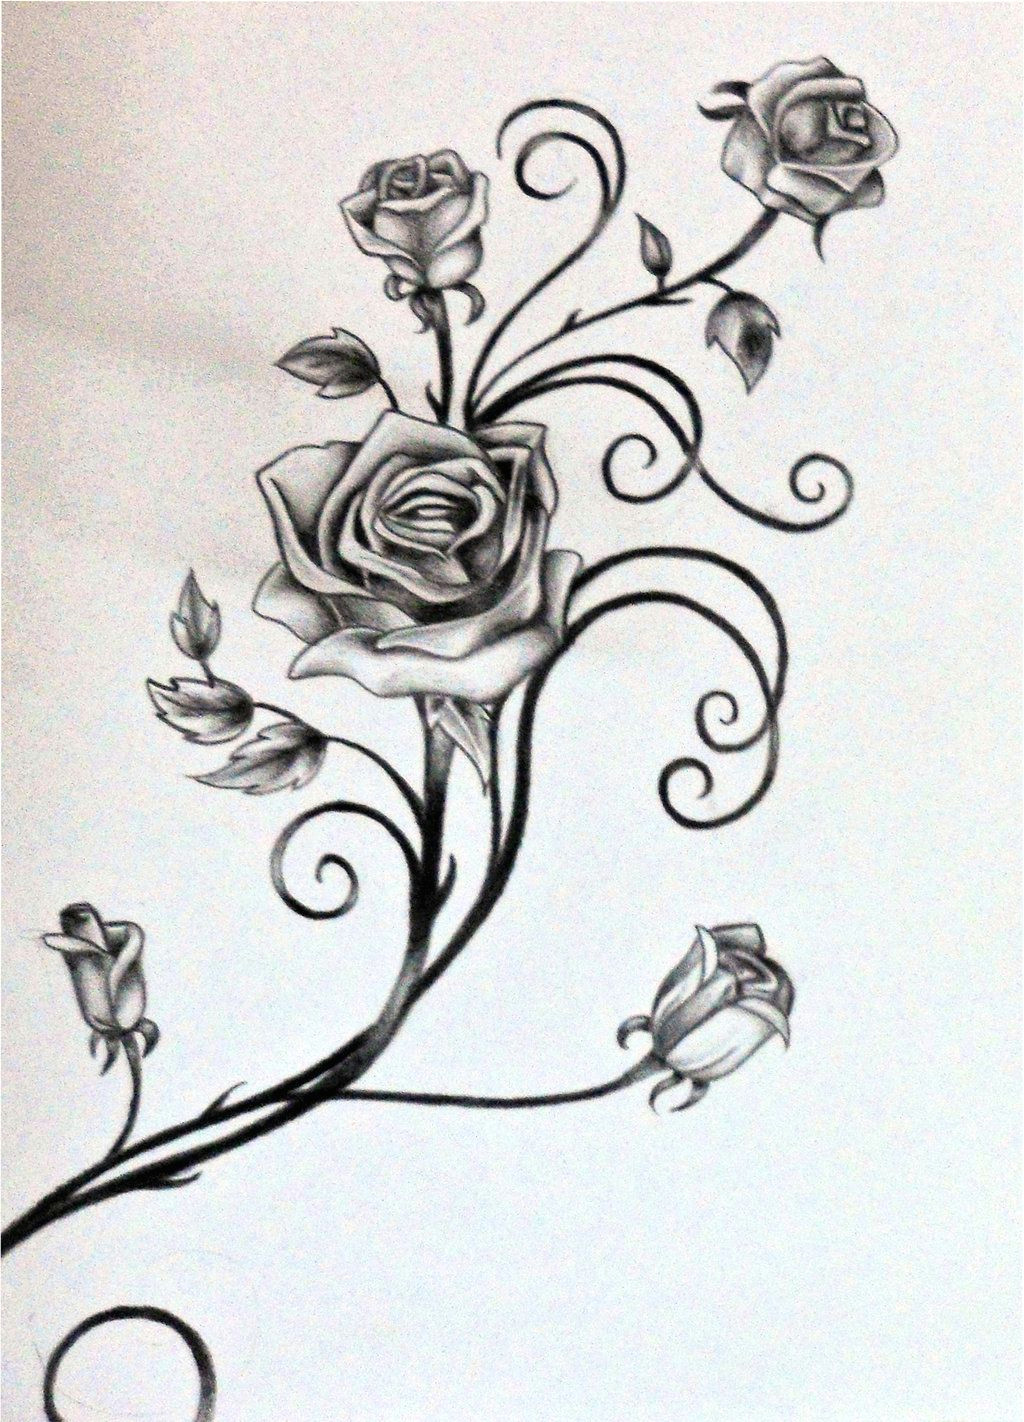 Drawing Vine Flowers Drawings Of Vines and Leaves Roses and the Vine by Rosilutfi